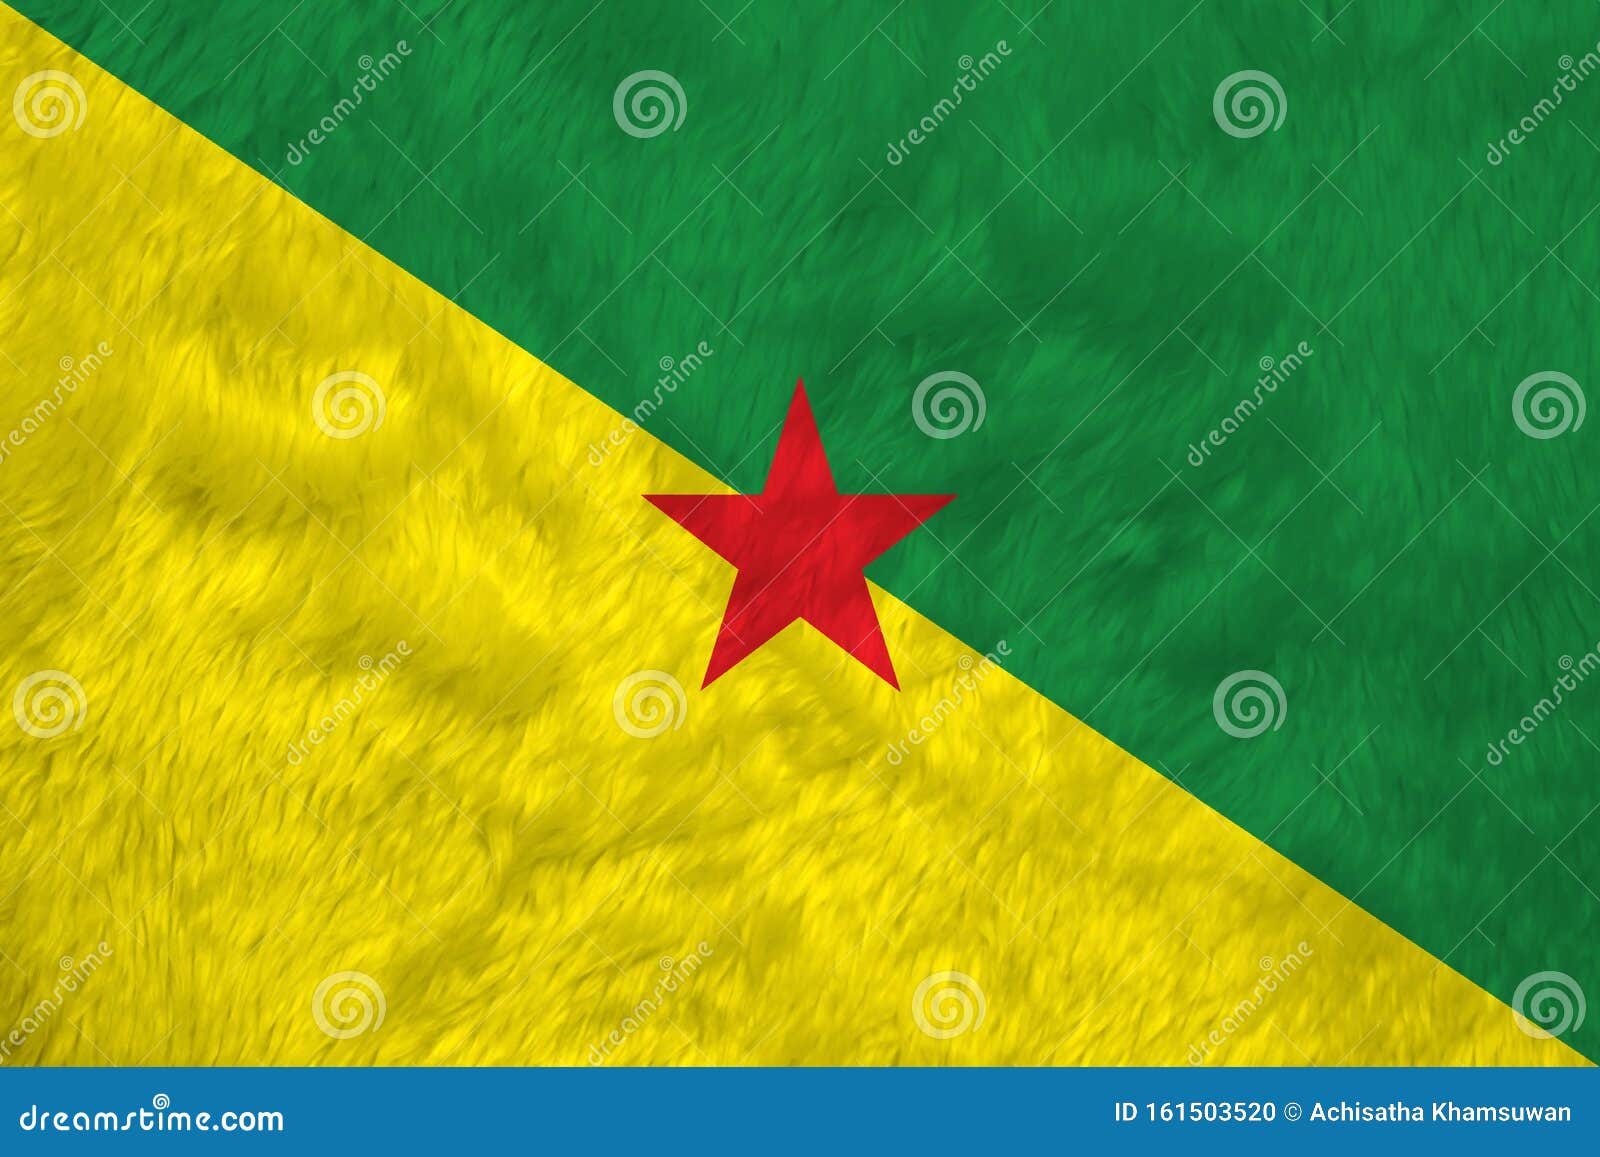 Towel Fabric Flag of Guiana. the Green and Yellow with Red Star Stock Photo - Image of patriotic, national: 161503520